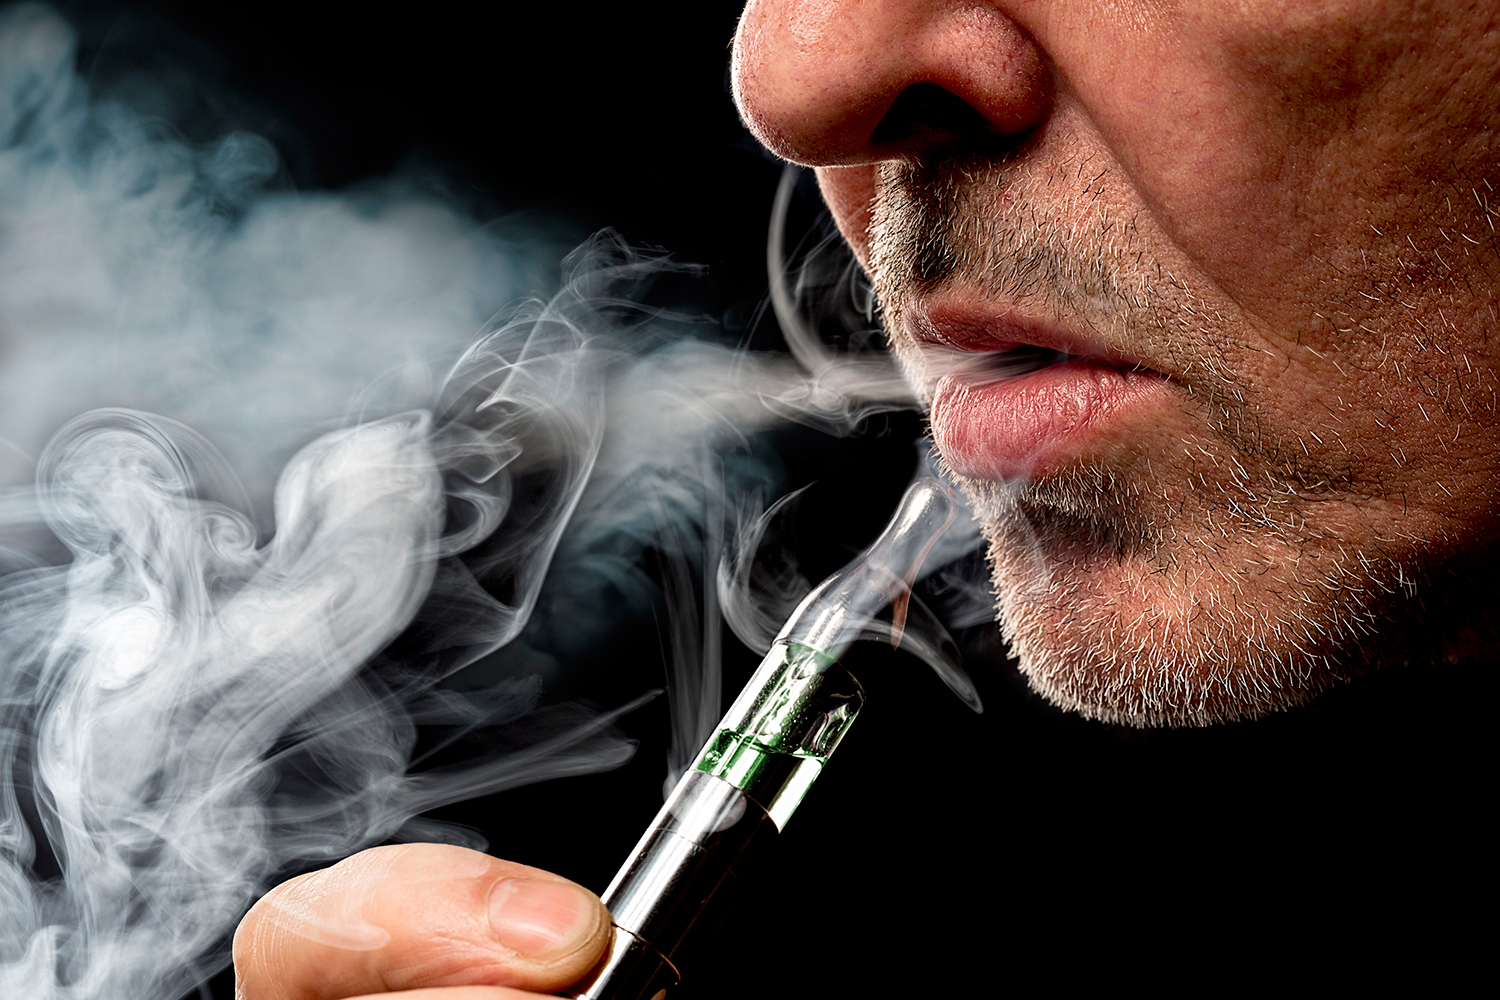 E-cigarette flavors are toxic to white blood cells, warn scientists